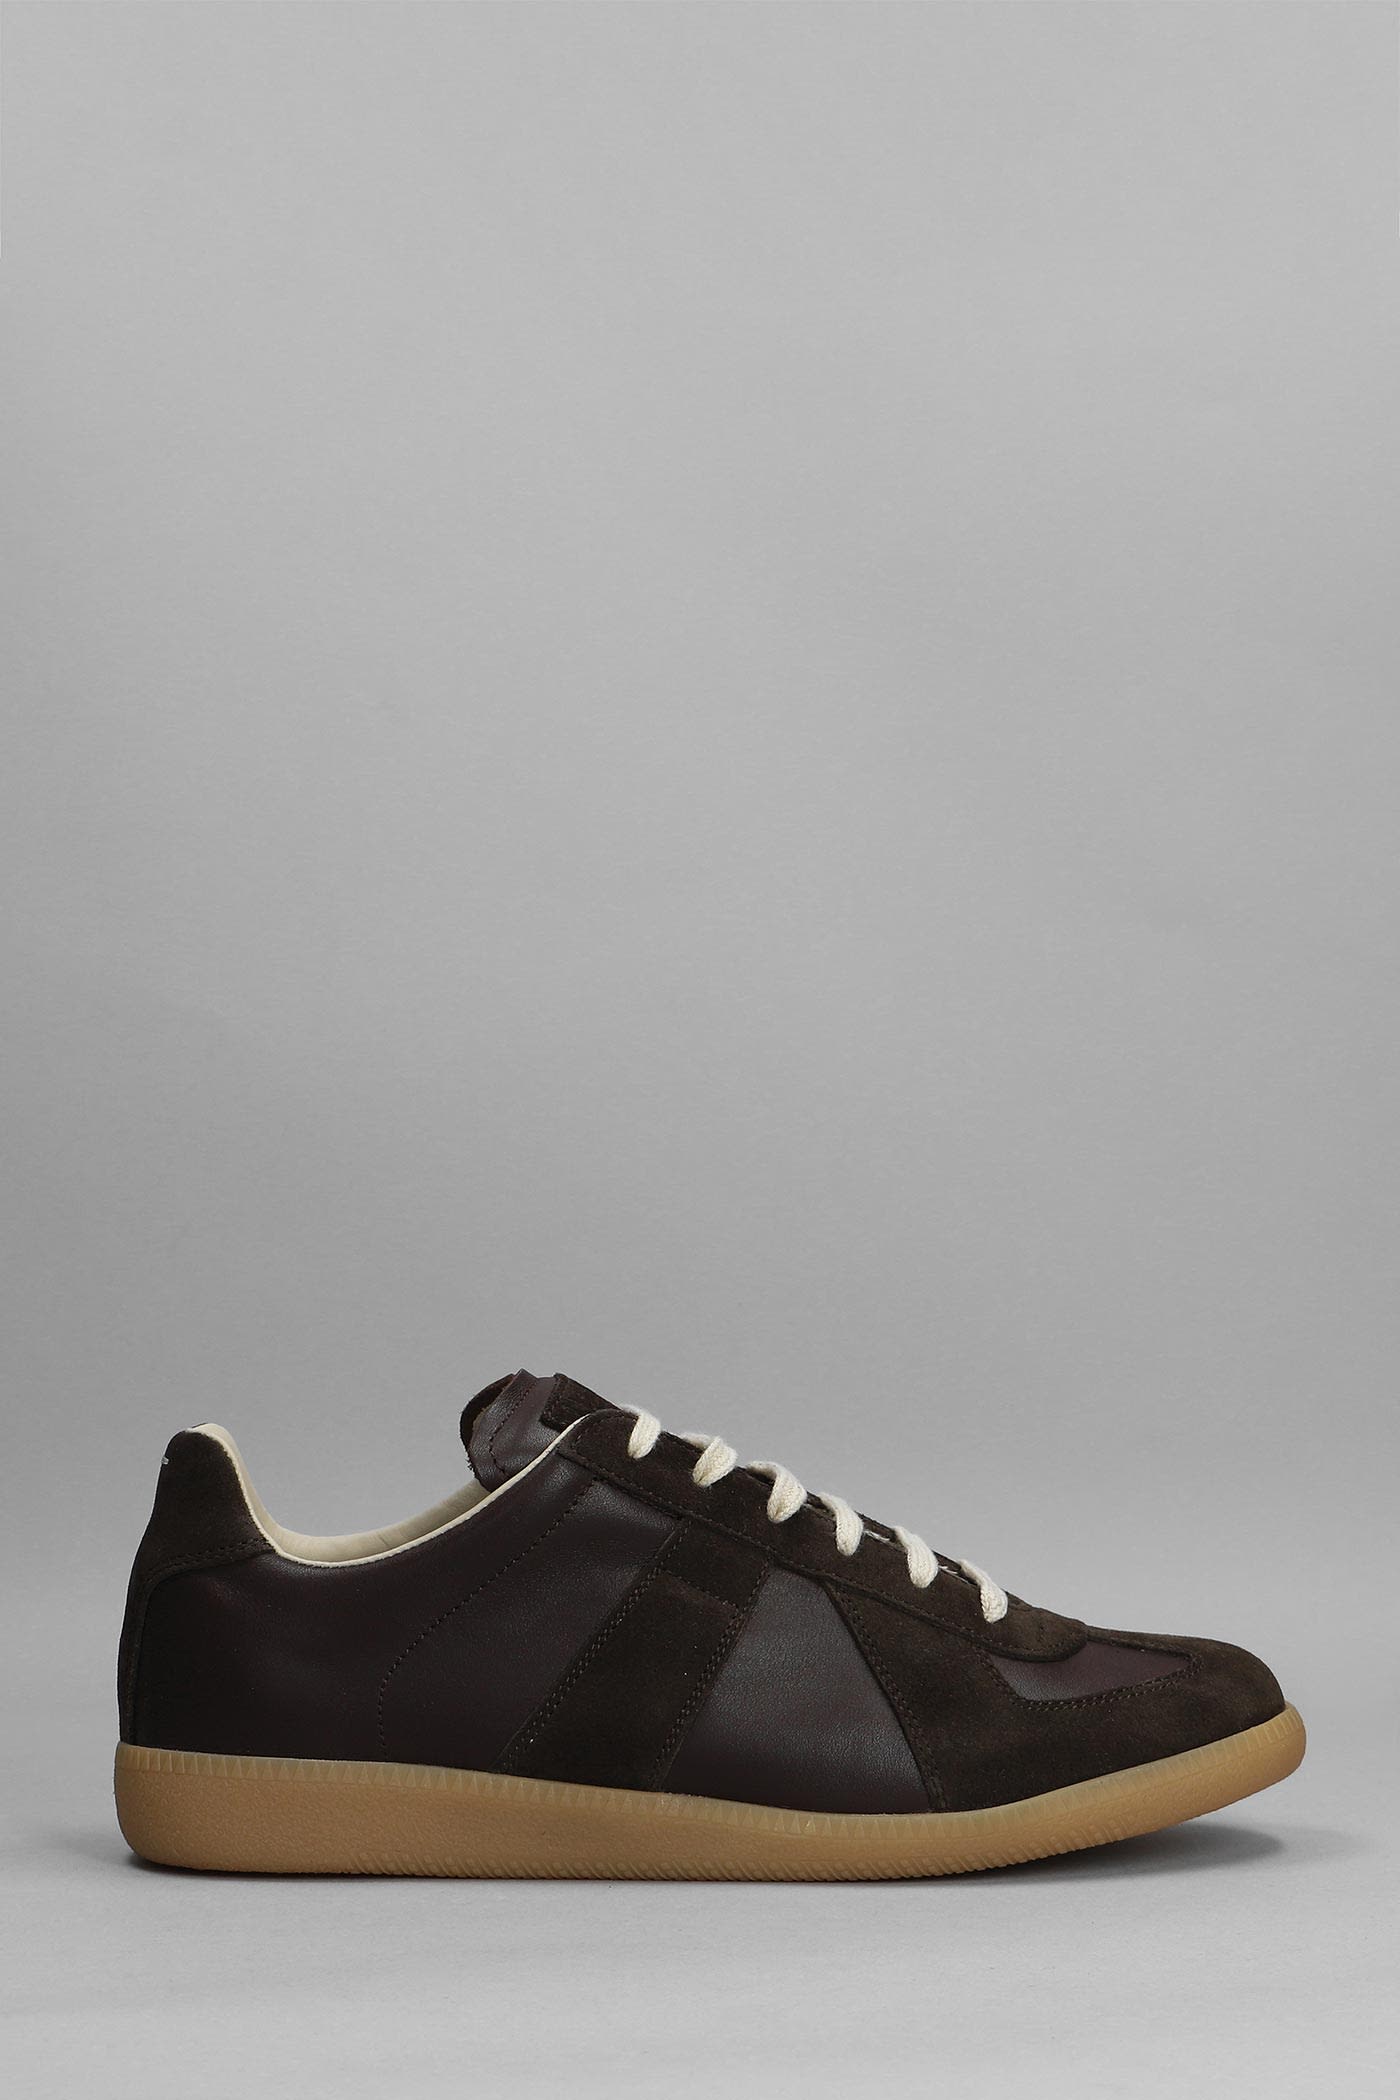 MAISON MARGIELA REPLICA SNEAKERS IN BROWN SUEDE AND LEATHER